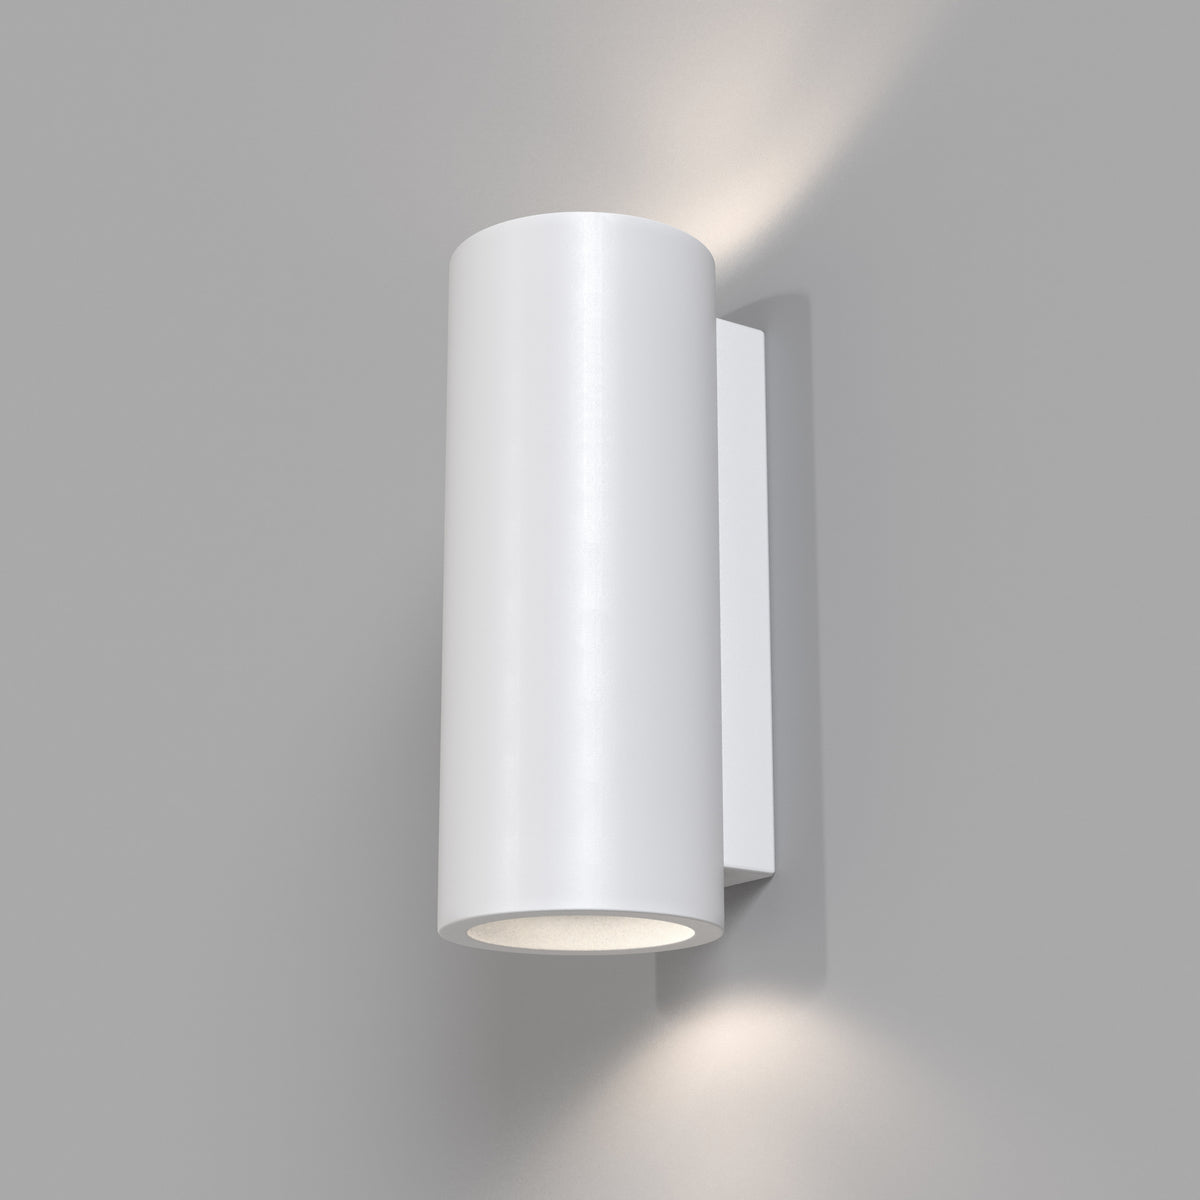 Parma Indoor Double Wall Light -  White Finish